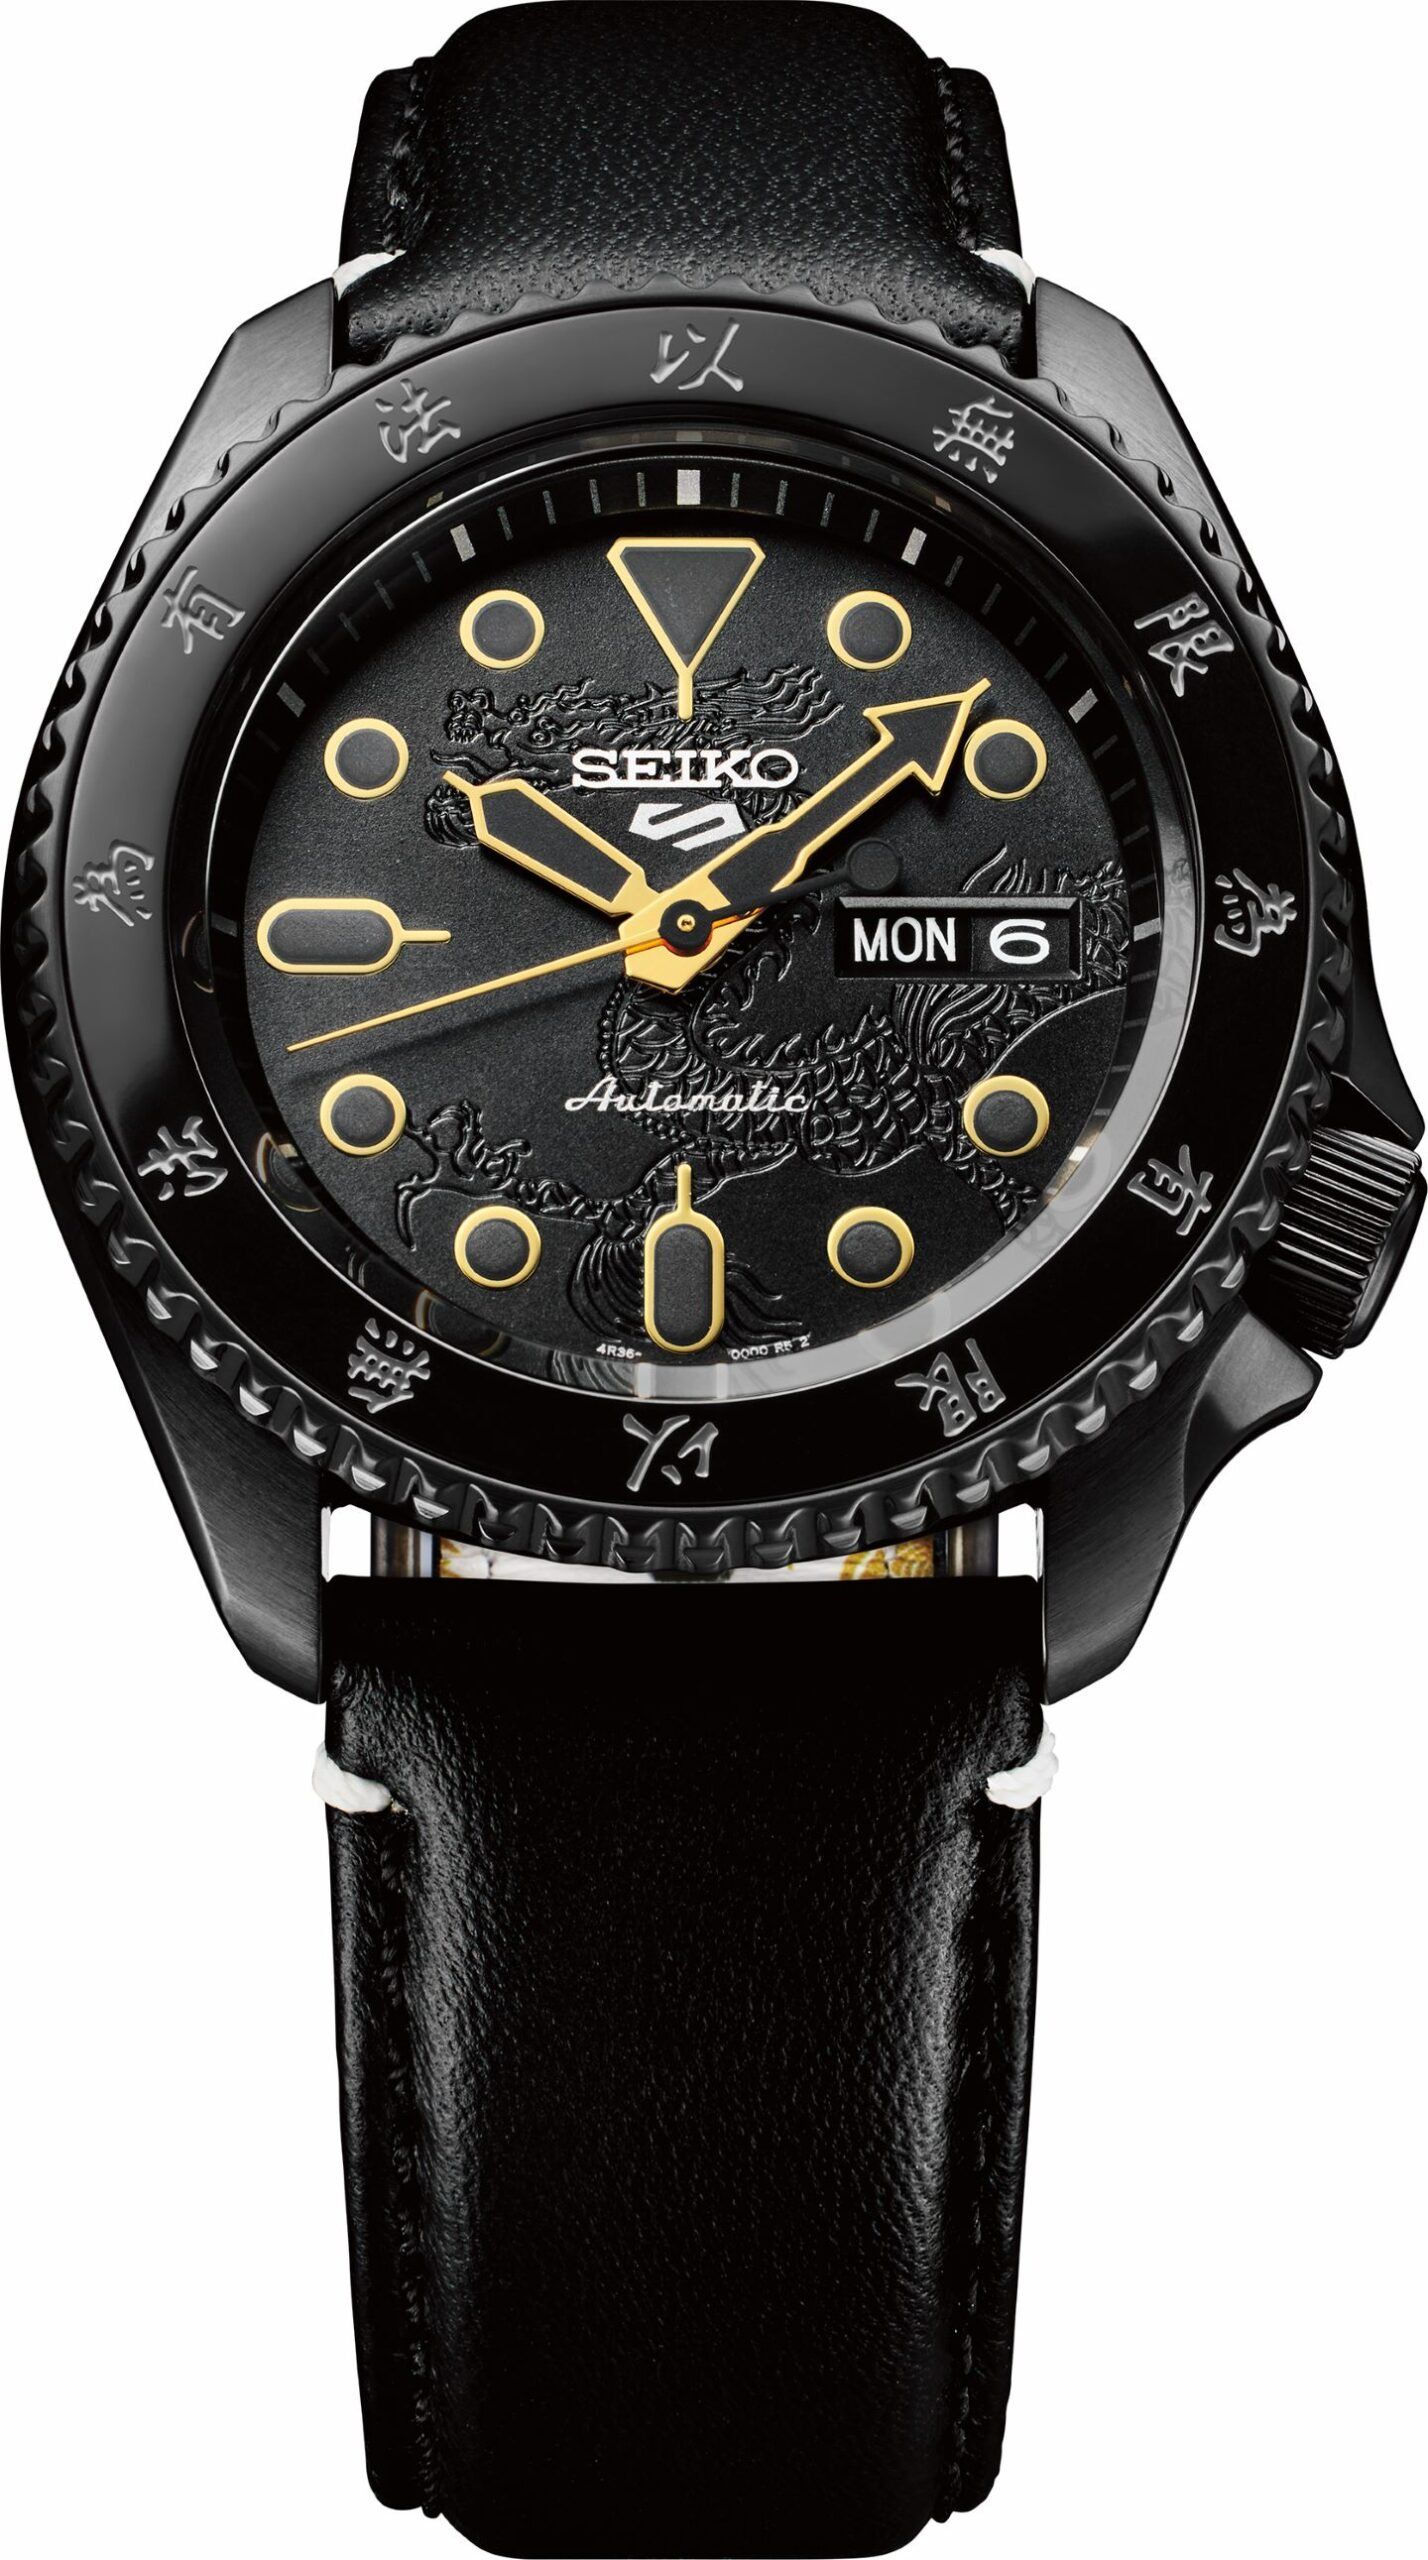 A detailed view of the timepiece